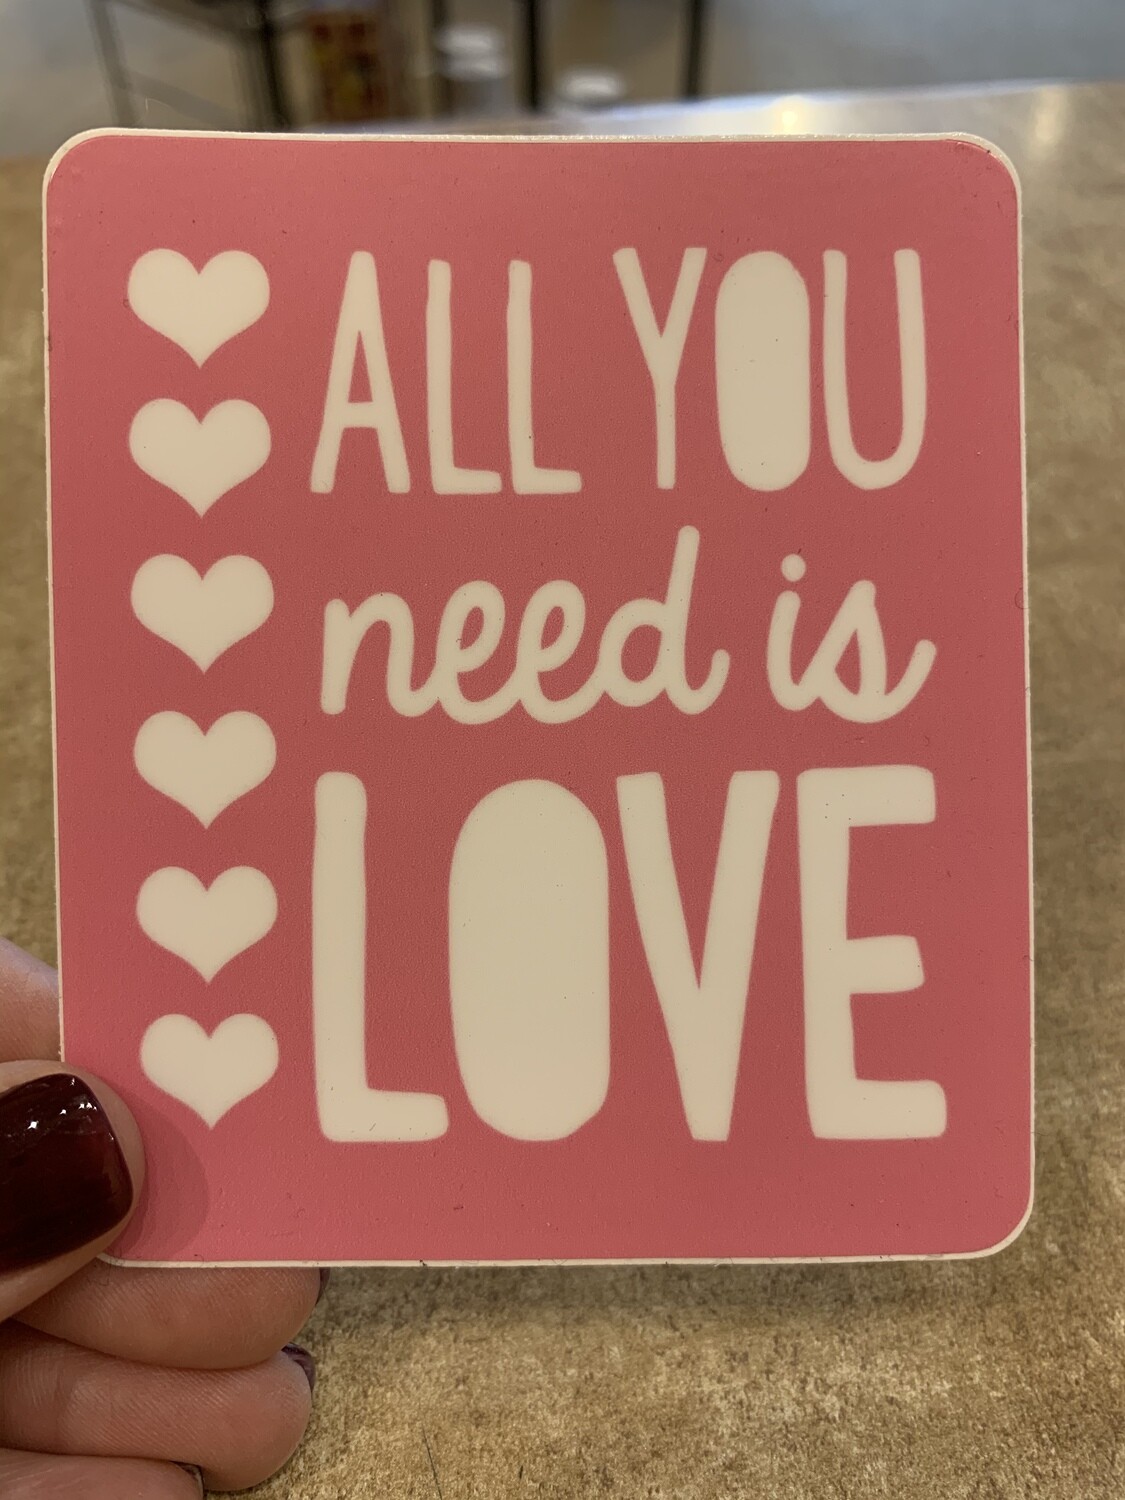 All You Need is Love sticker